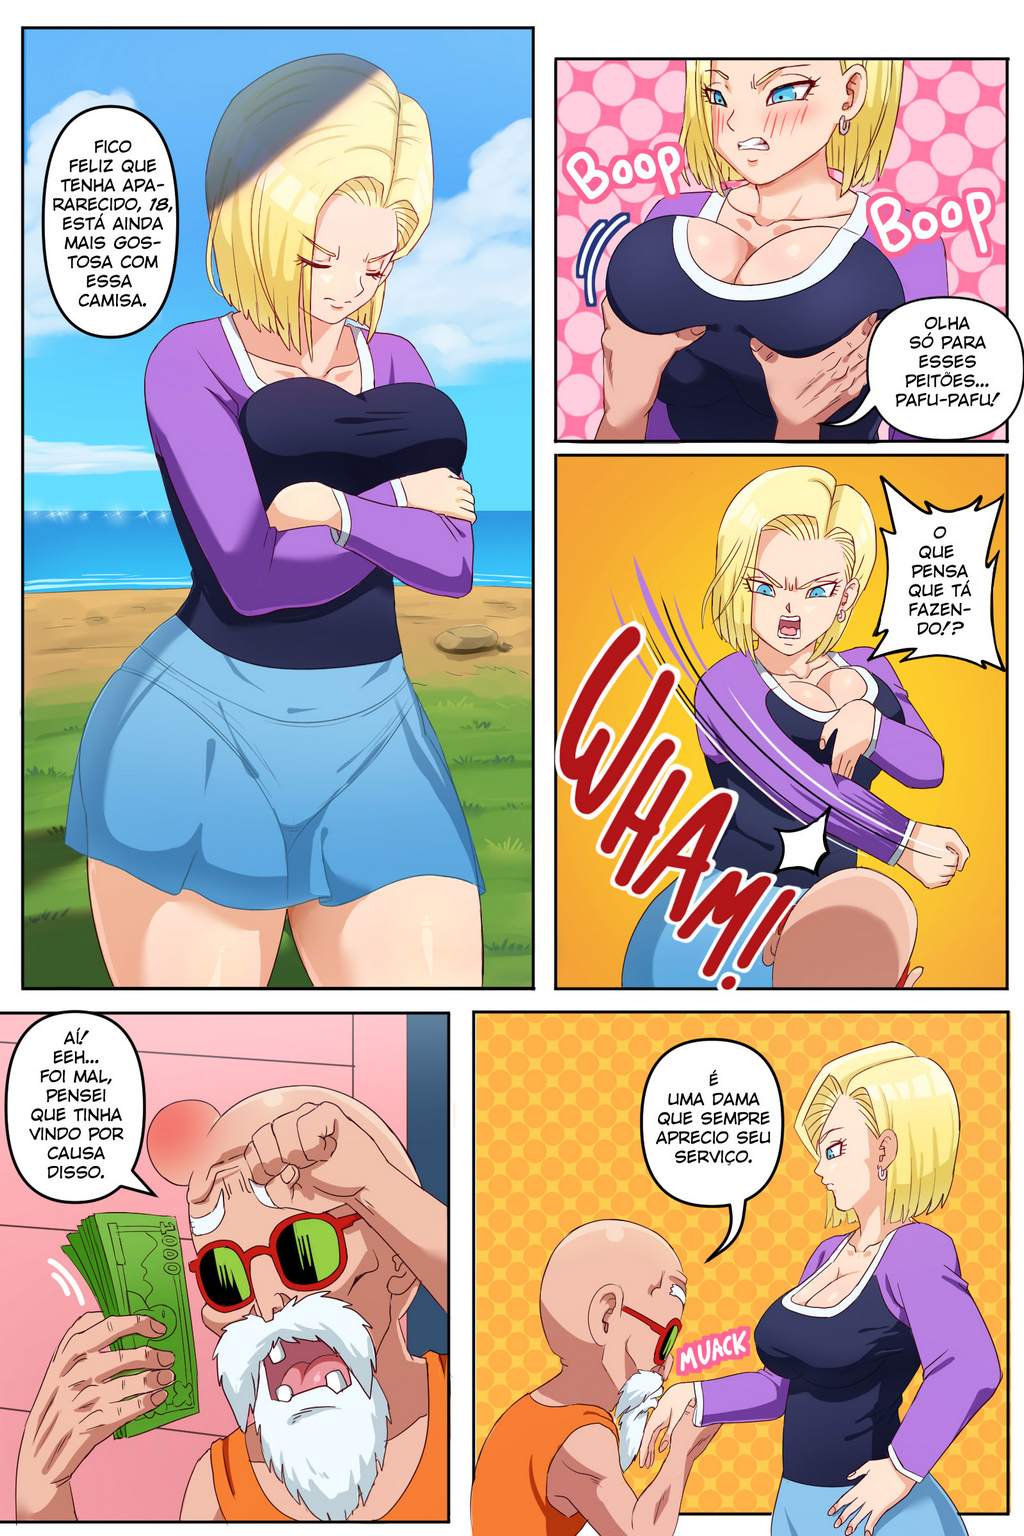 Android-18-NTR-part-1-PinkPawg-Hentai-Pag.-03